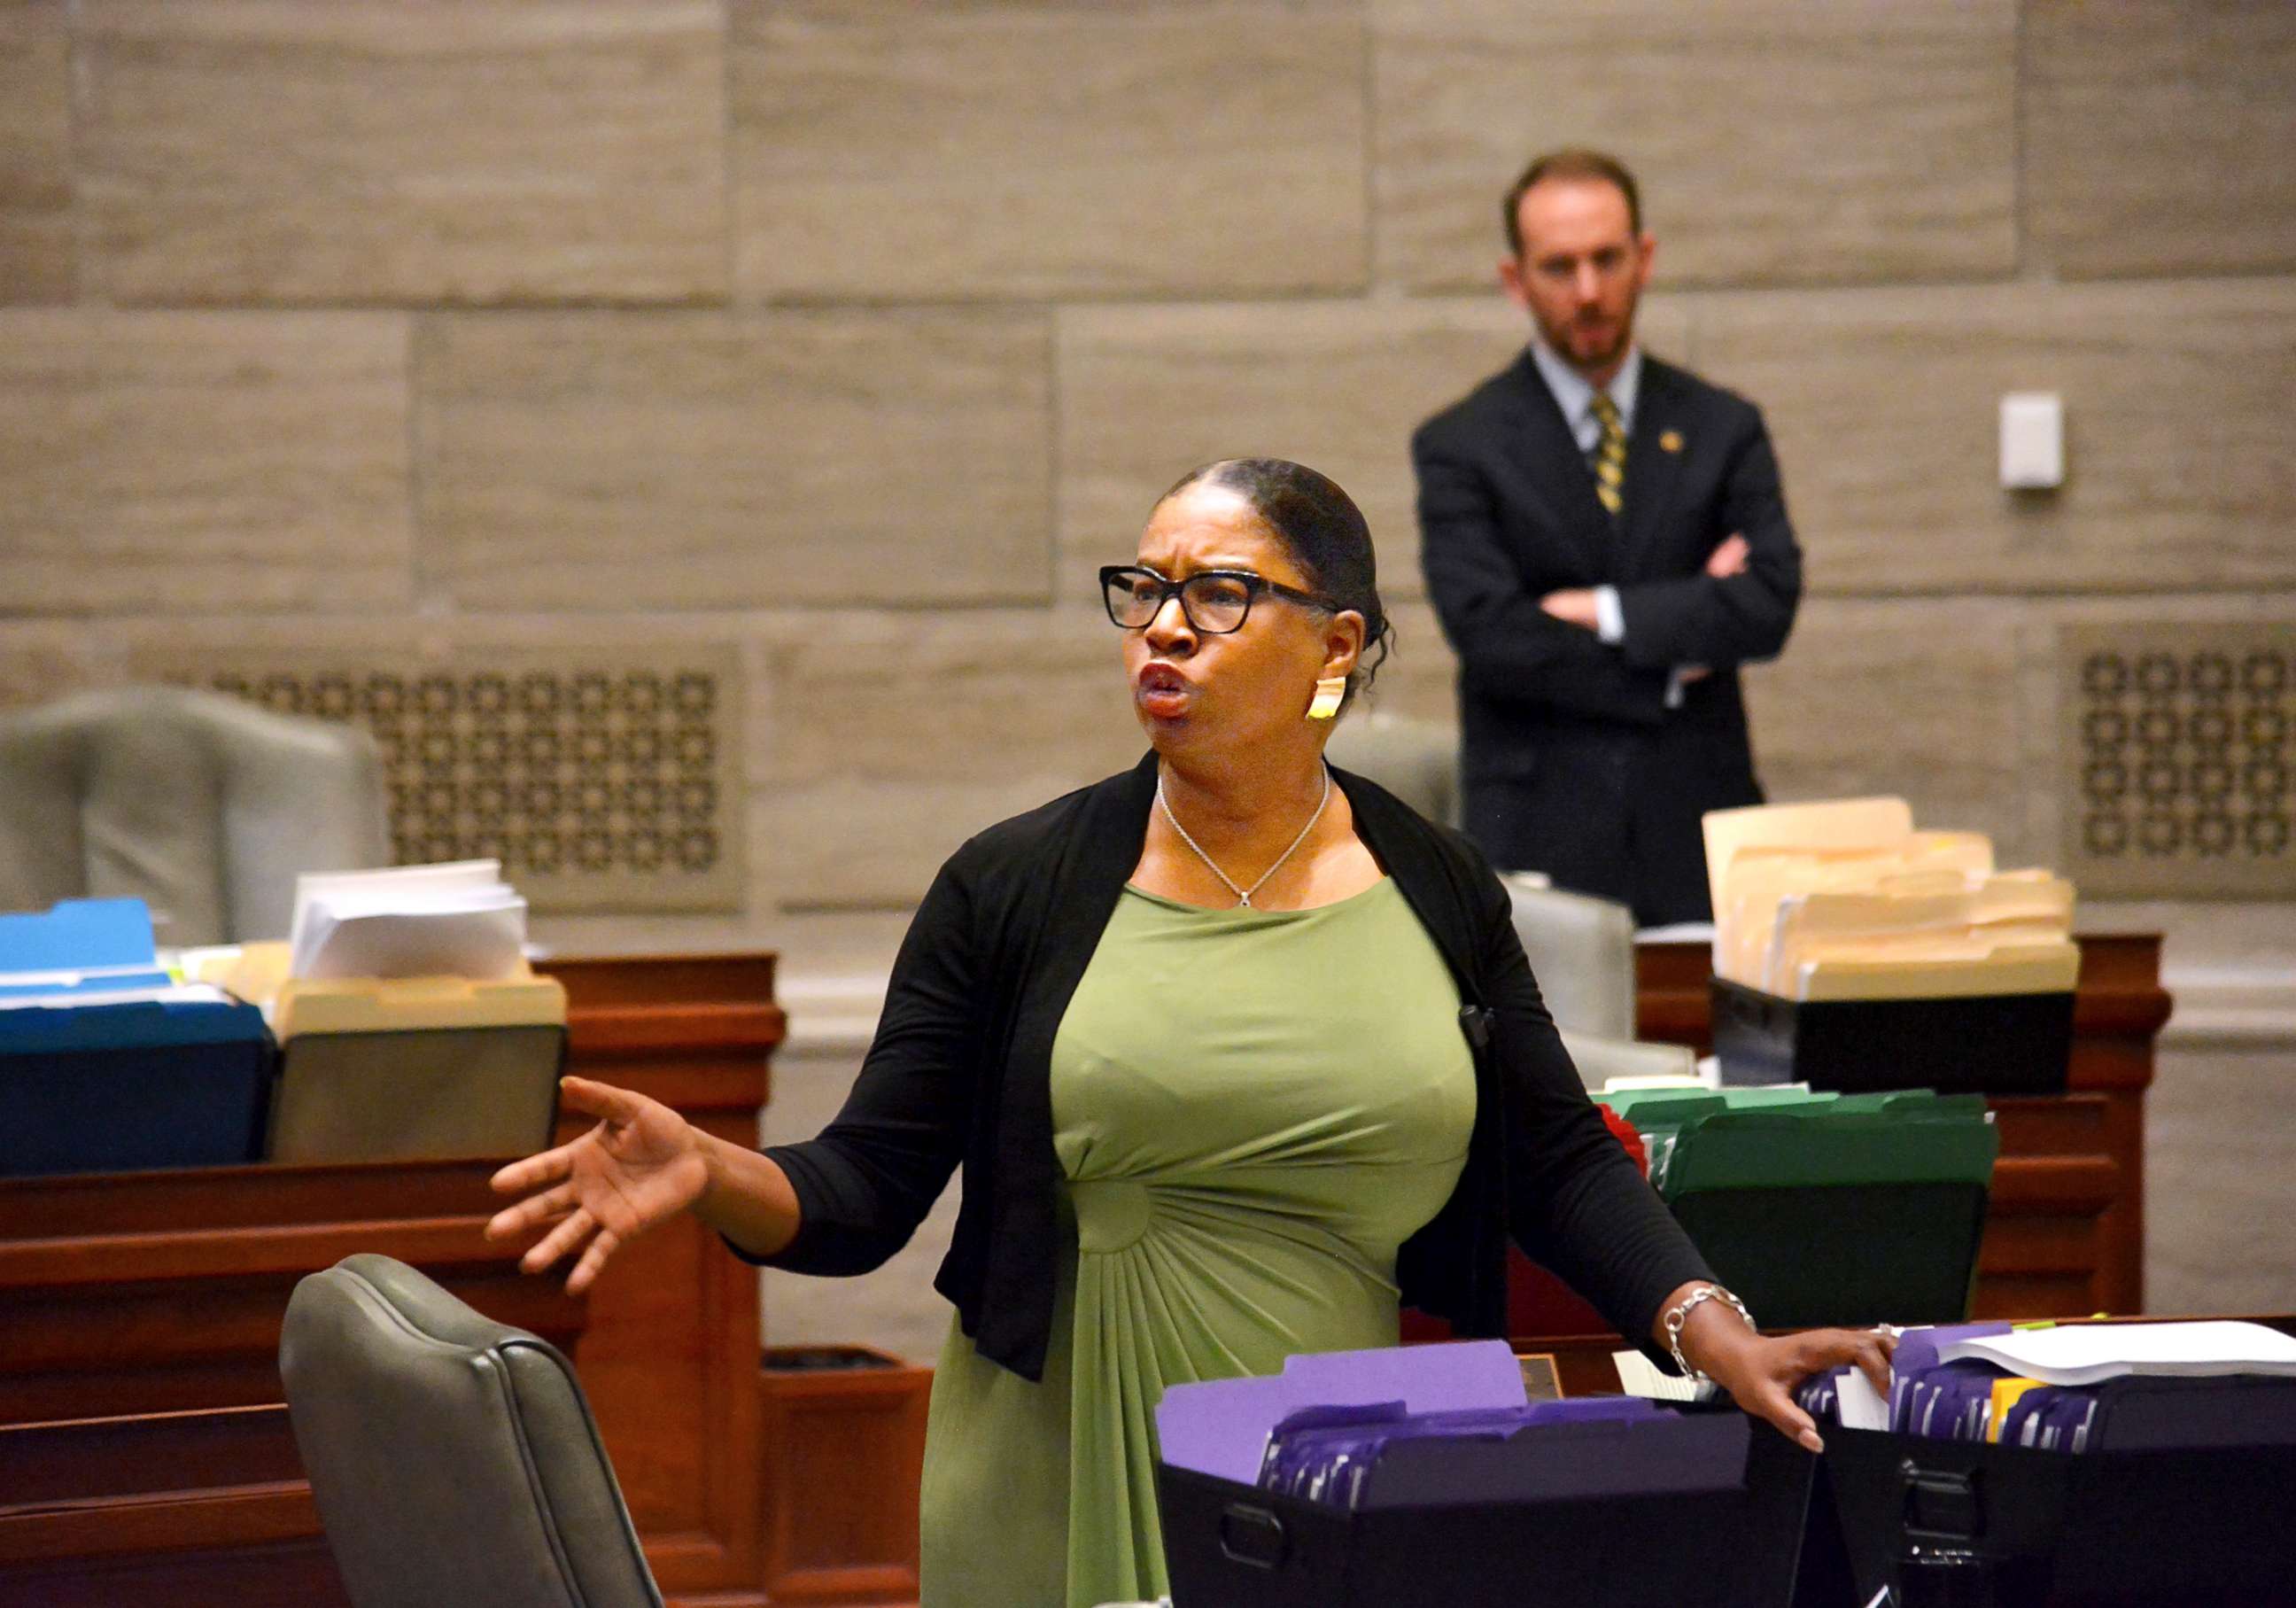 PHOTO:During debate in the Missouri Senate in Jefferson City on Wednesday, May 15, 2019, Freshman senator, Karla May, makes a point regarding Missouri's proposed new abortion law.